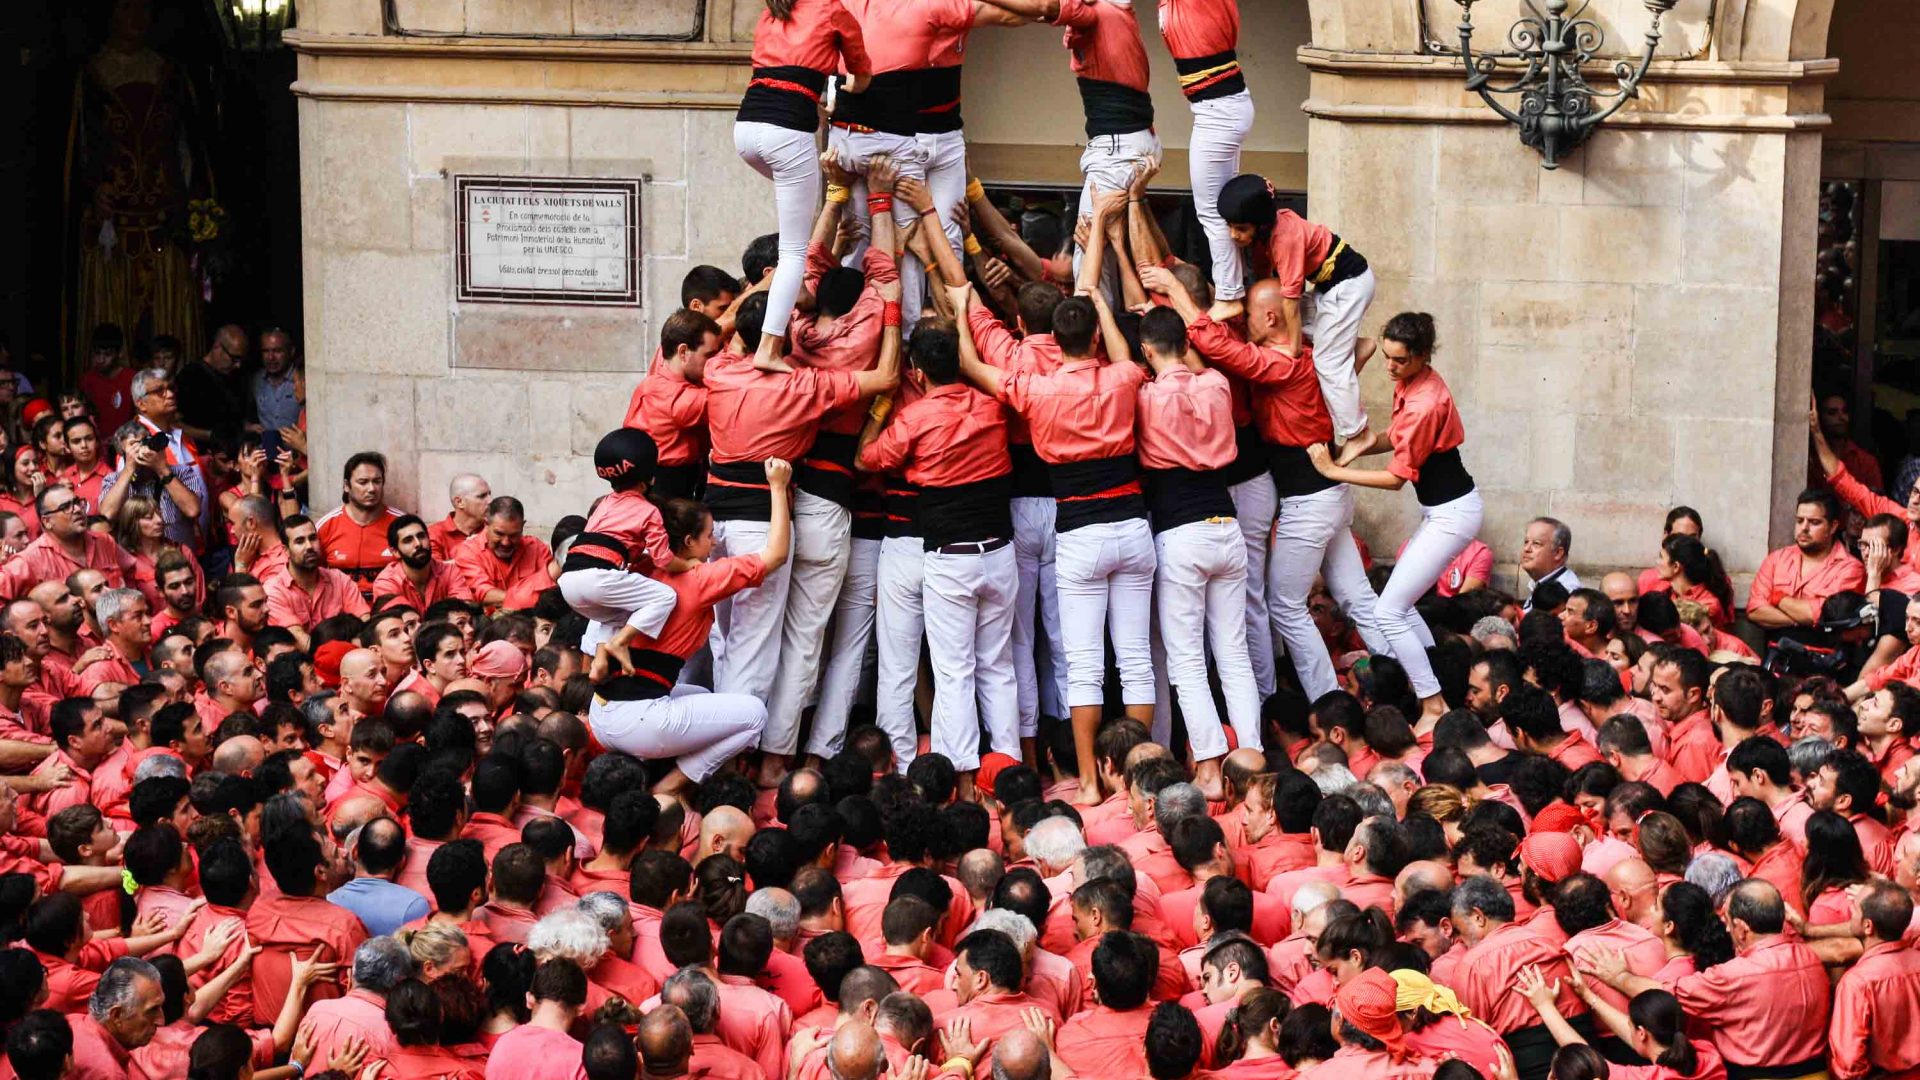 The Colla Joves team of castellers (human towers) in the tiny Catalan city of Valls.